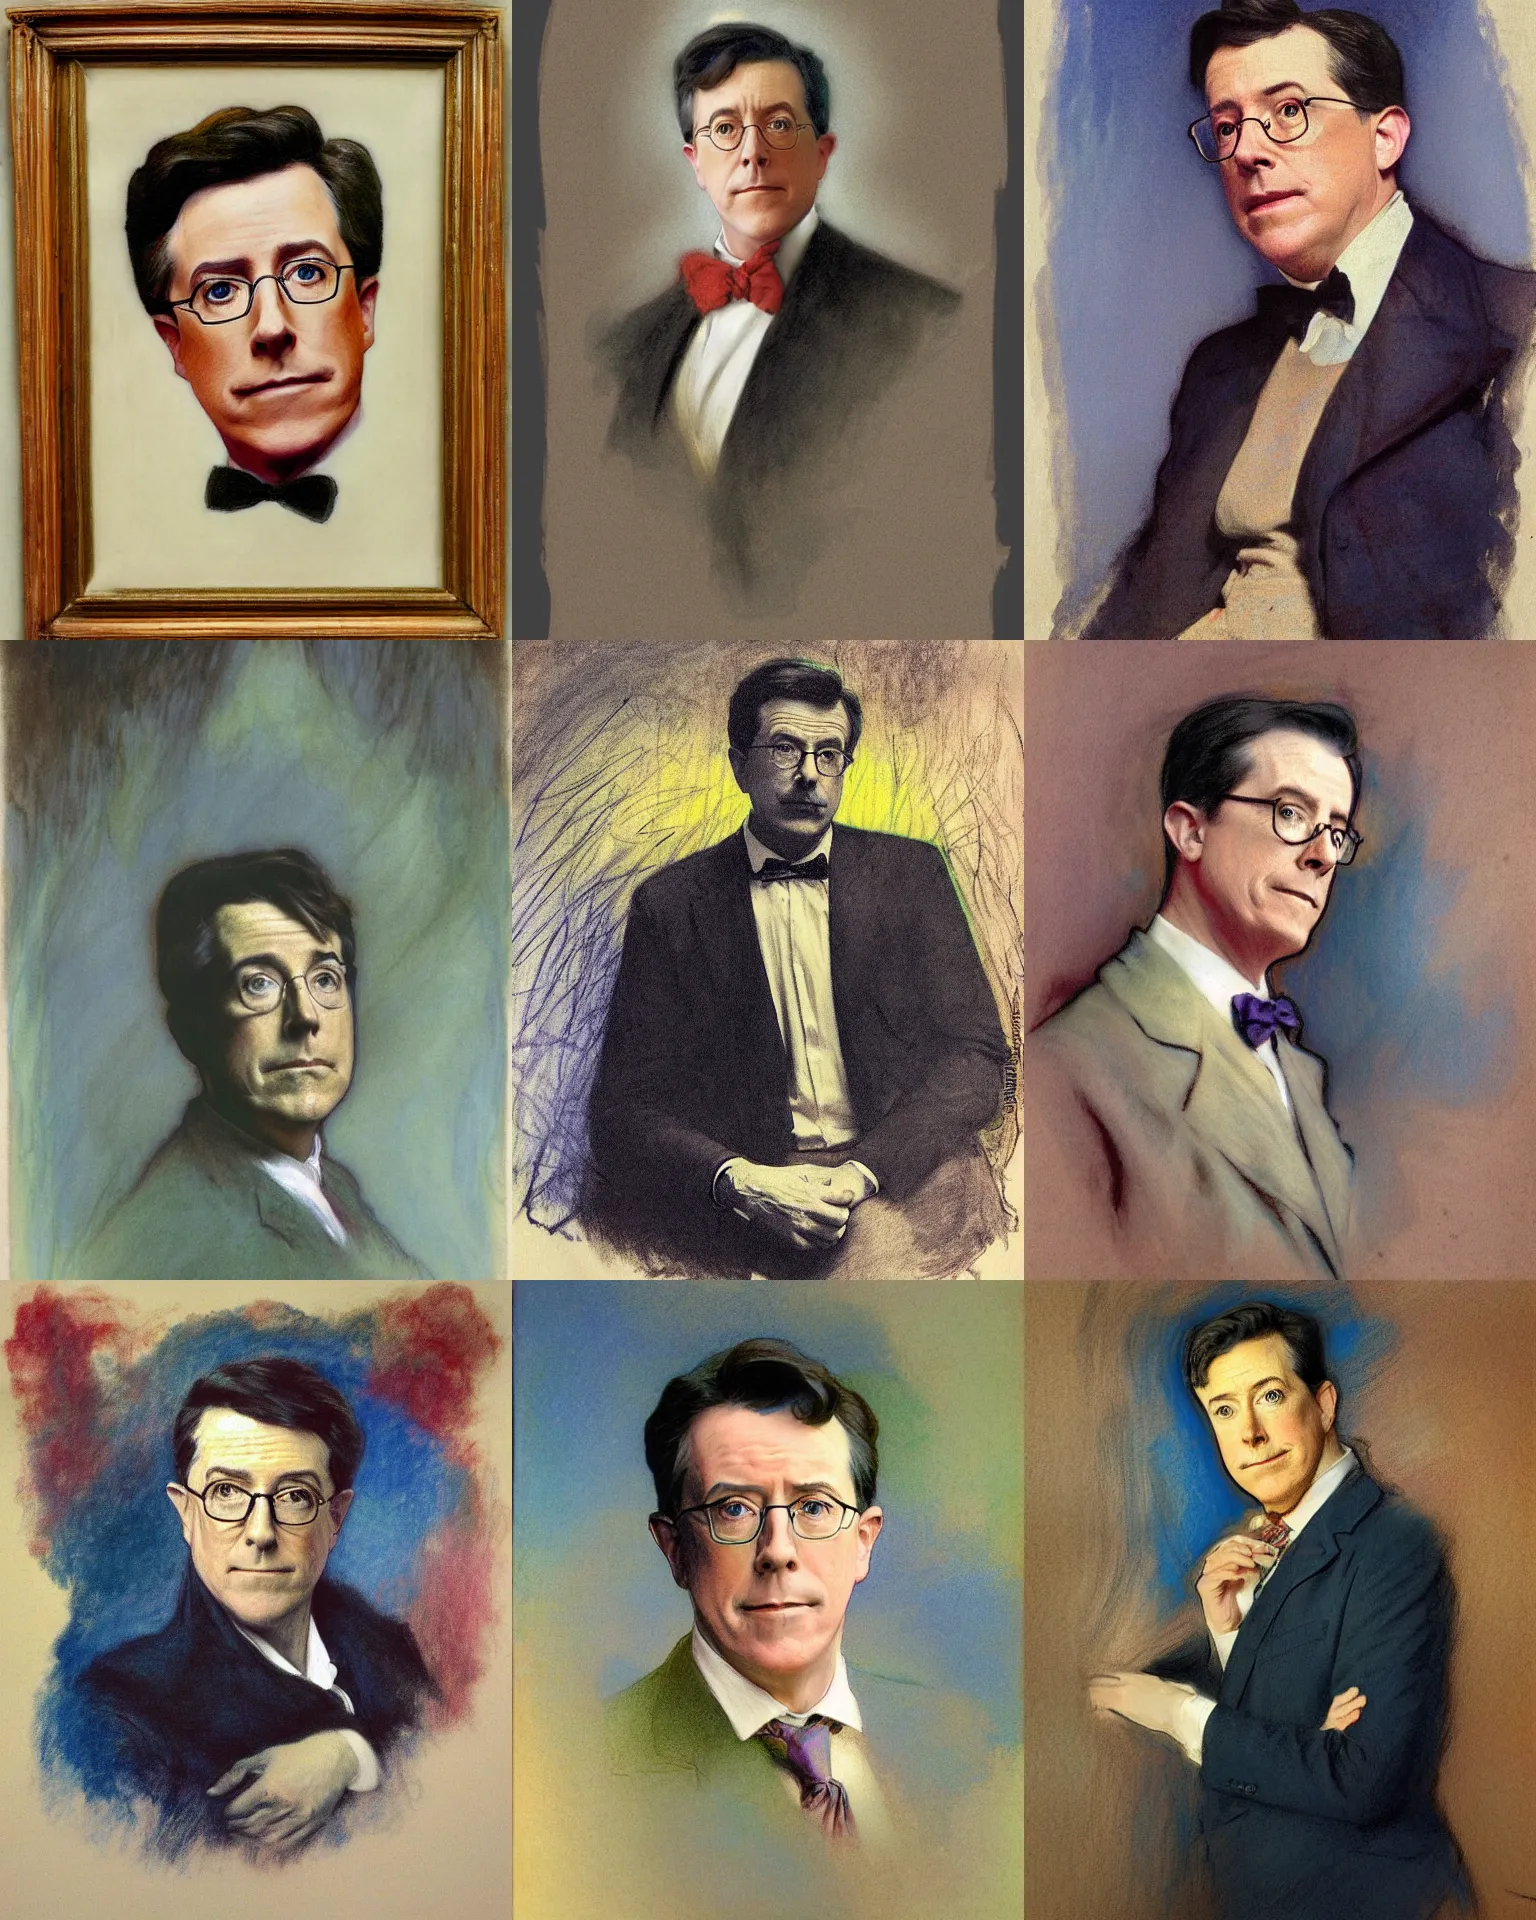 Prompt: colored chalk underdrawing linework portrait of steven colbert by john singer sargent, thomas moran, edmund dulac, fans hals, alphonse mucha, fashion photography, fully clothed